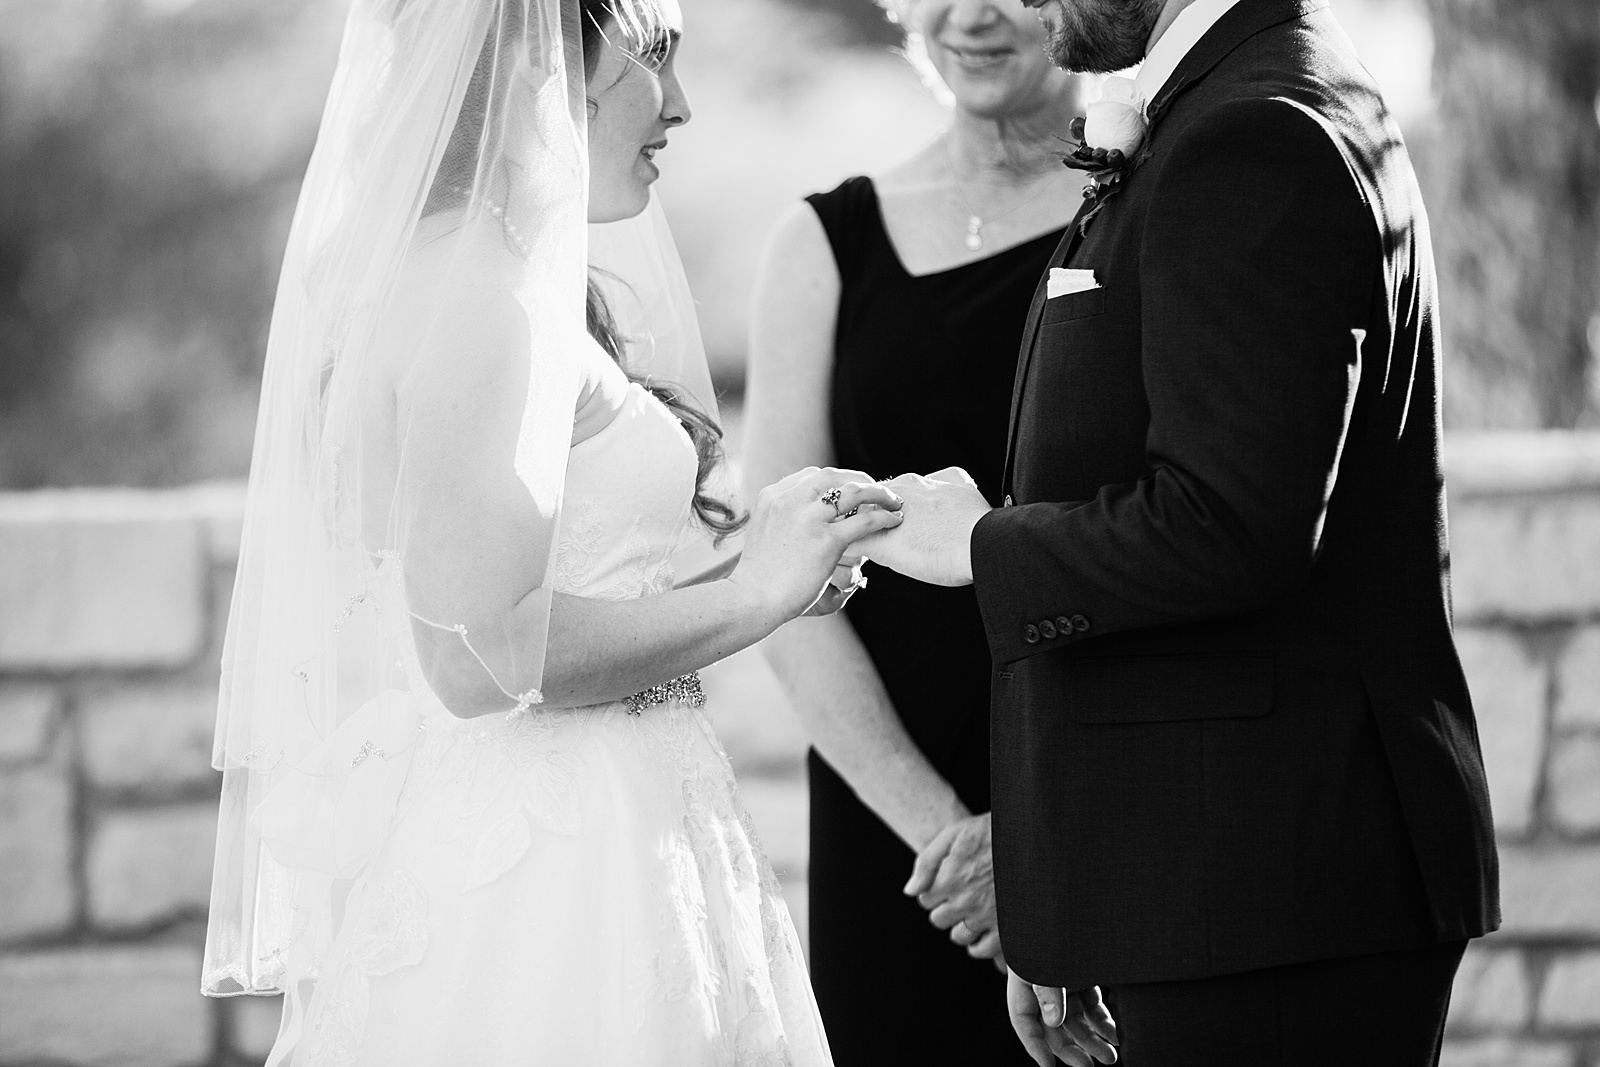 Bride and Groom exchange rings during their wedding ceremony at Ocotillo Oasis by Phoenix wedding photographer PMA Photography.